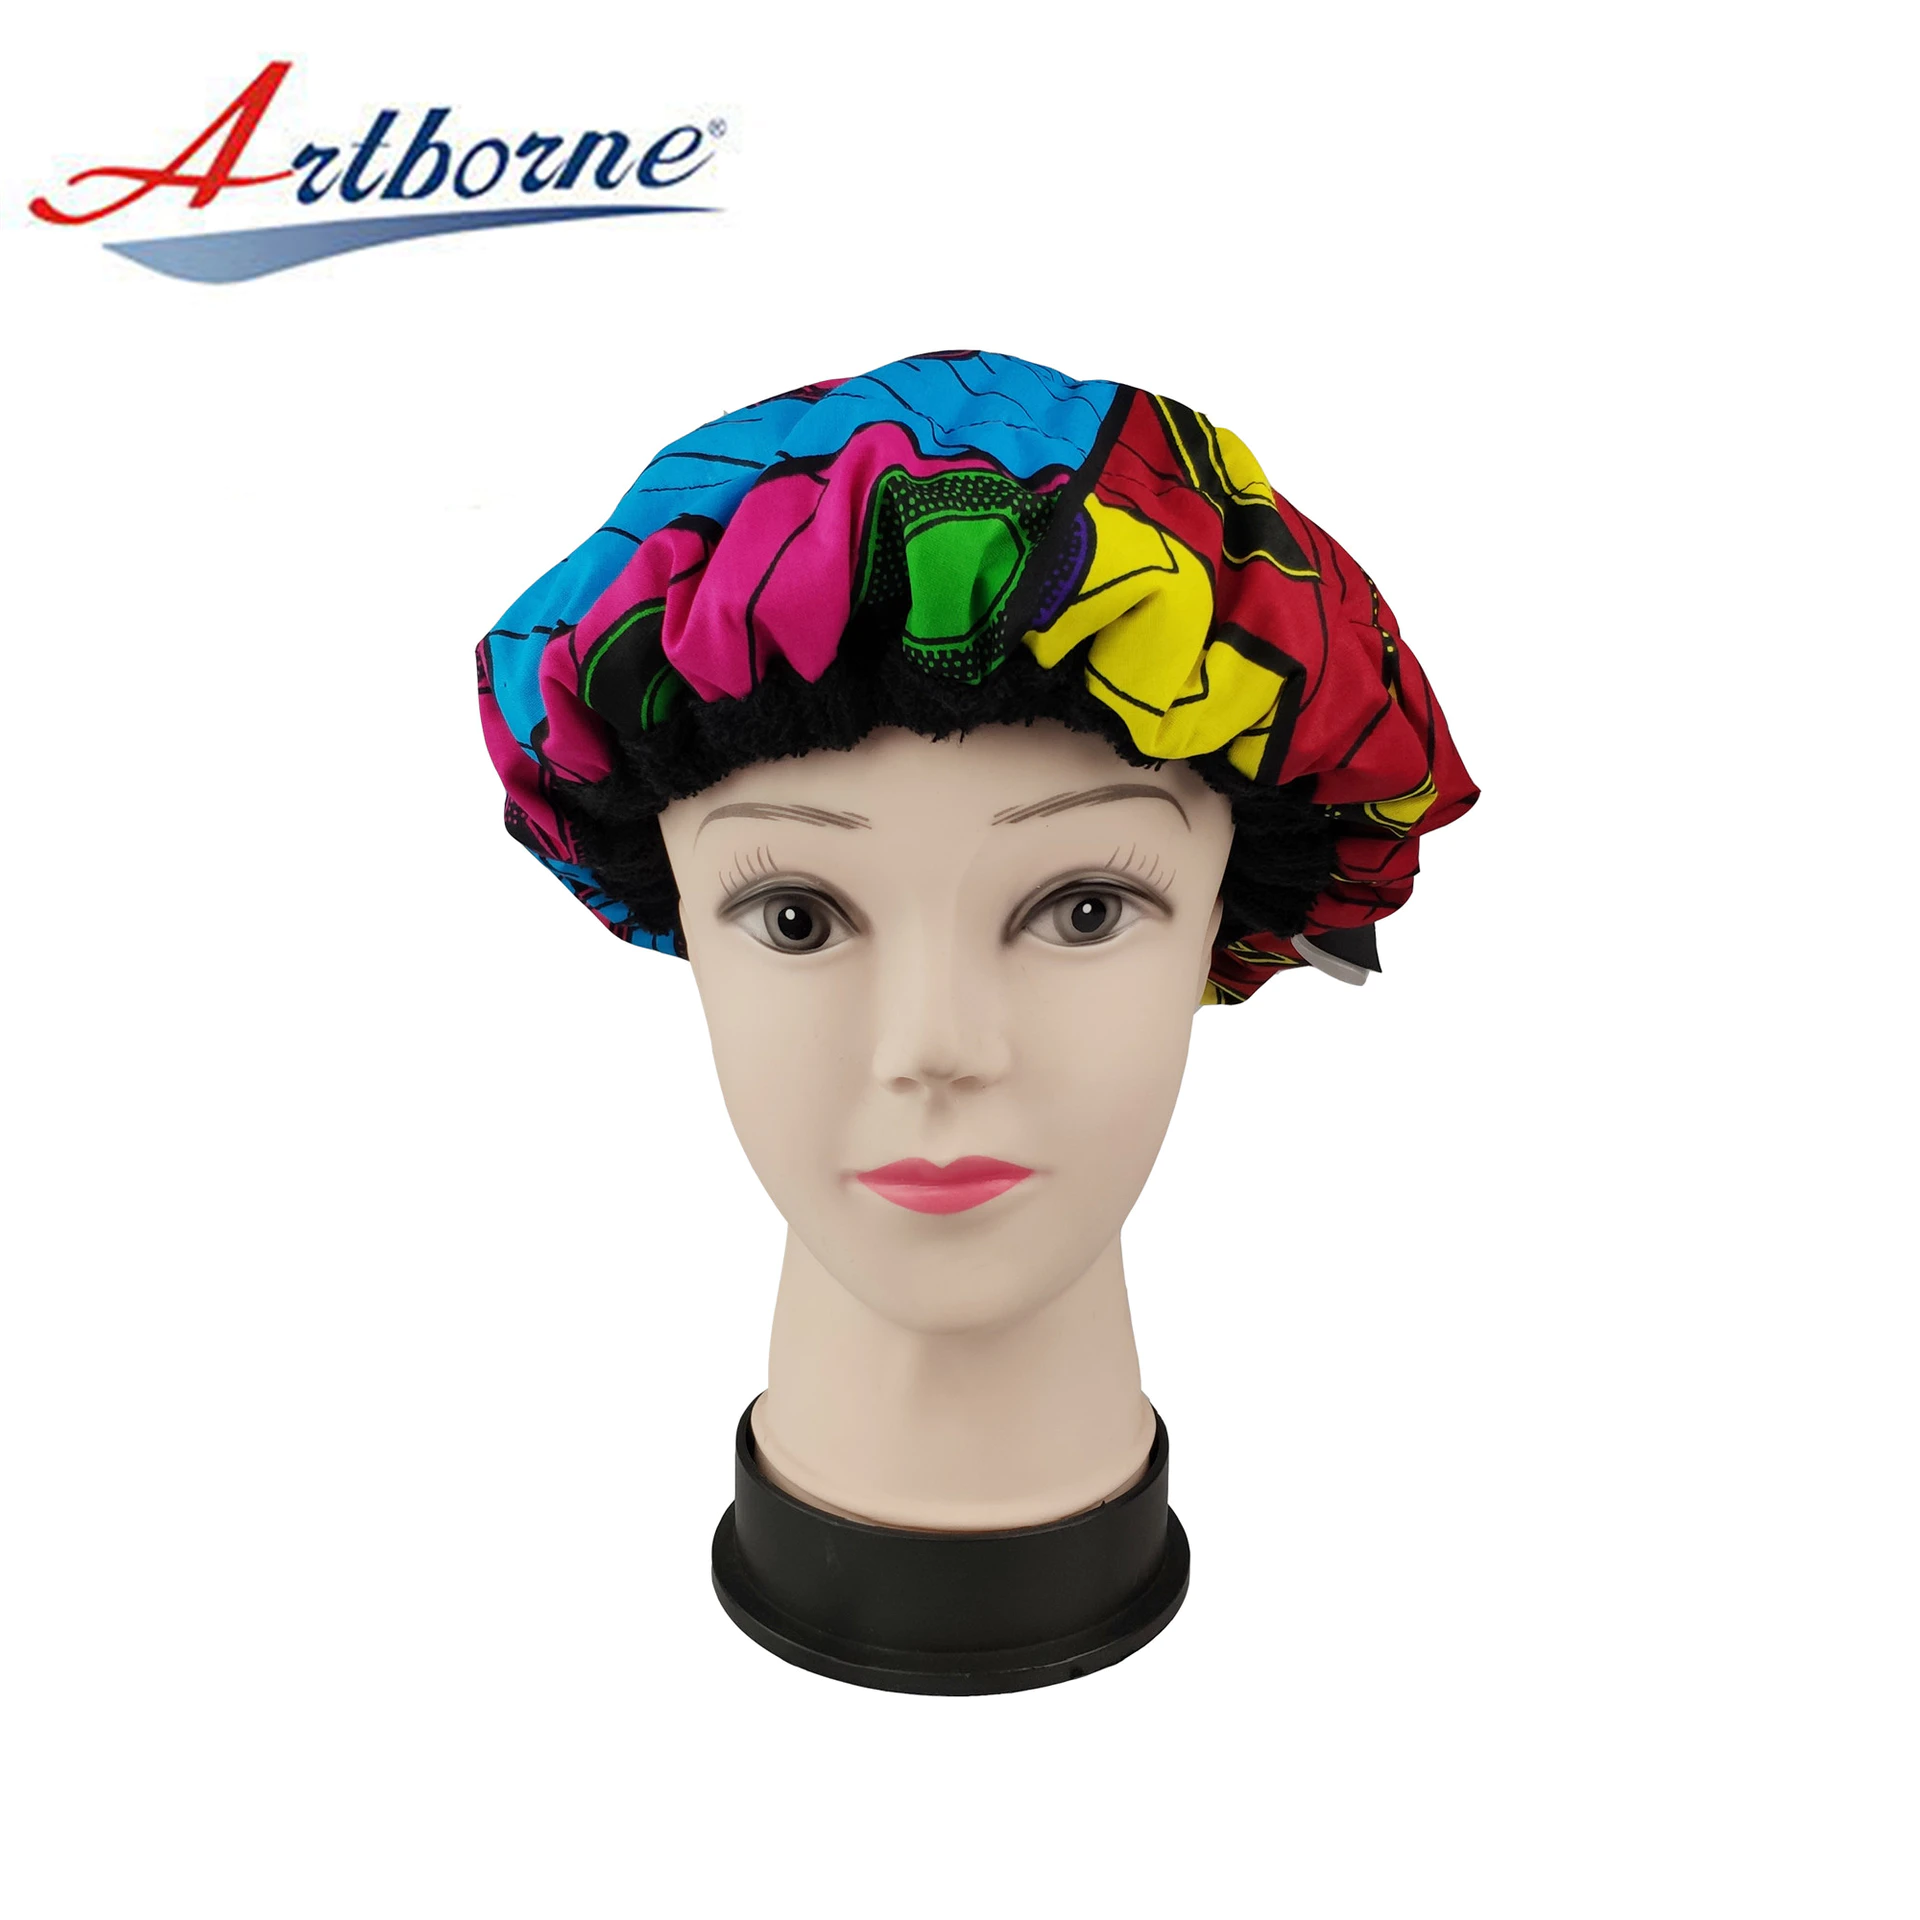 Artborne latest shower cap for women suppliers for home-35